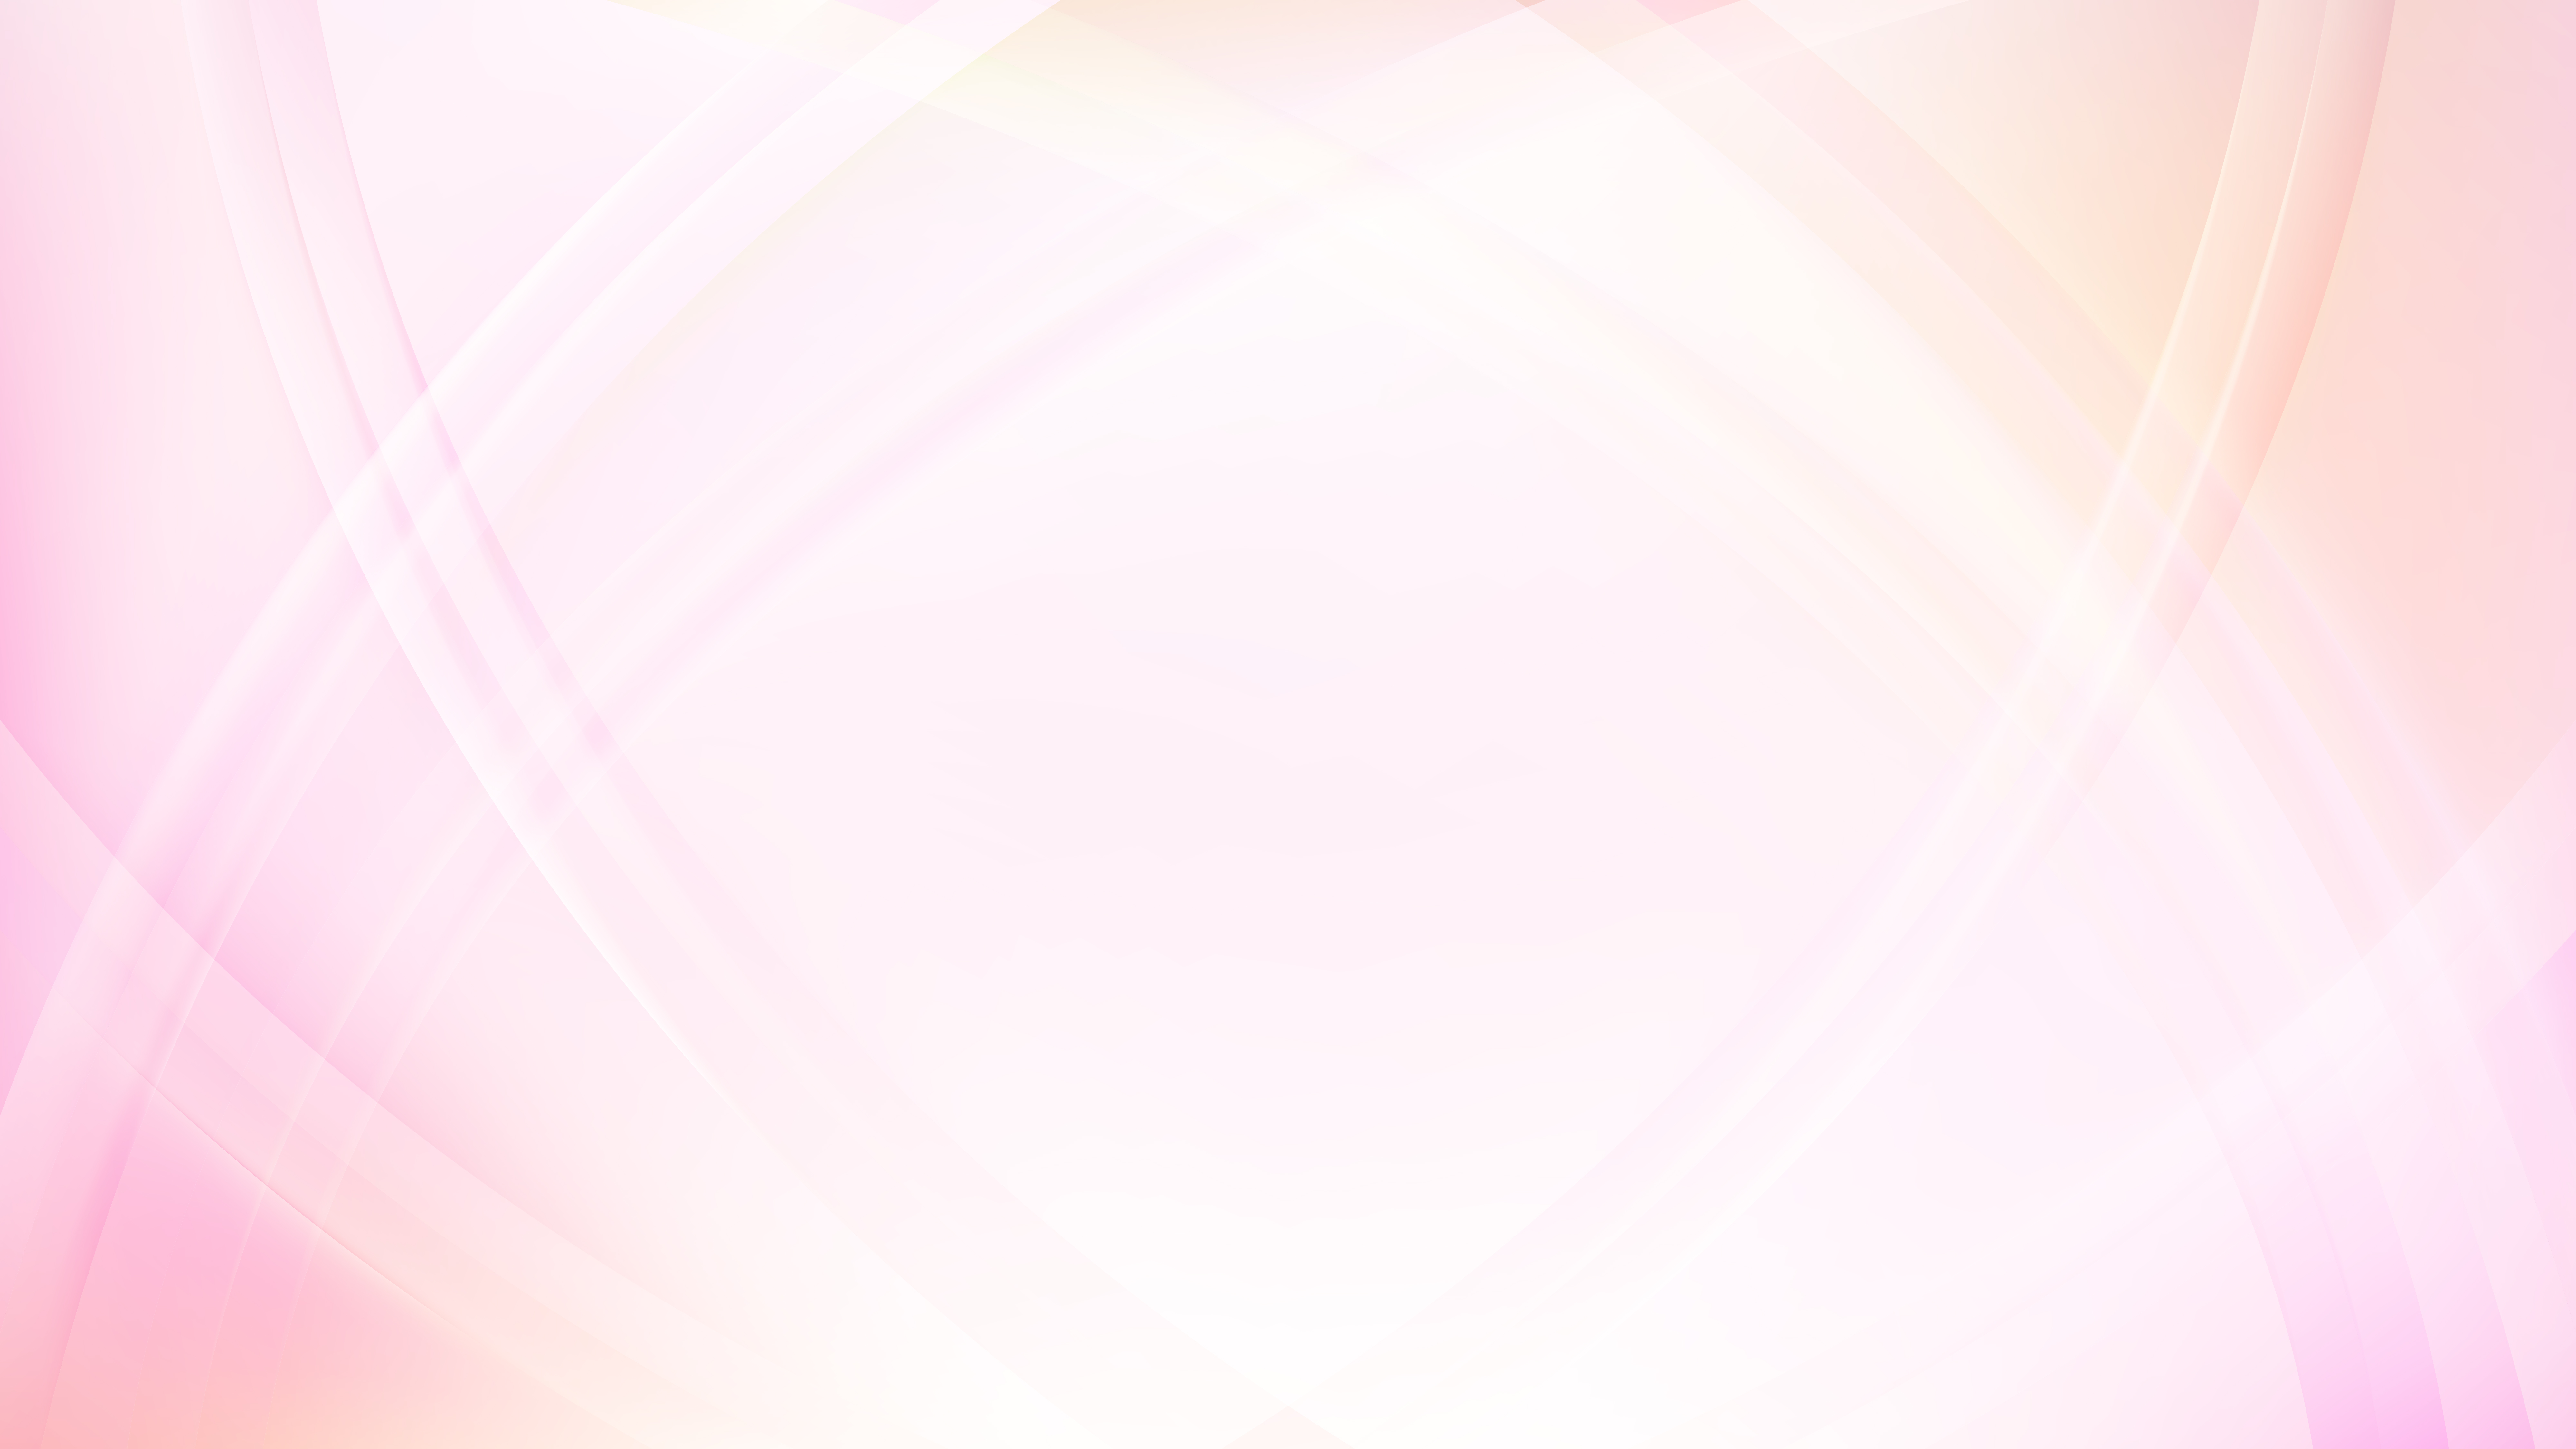 baby pink abstract background